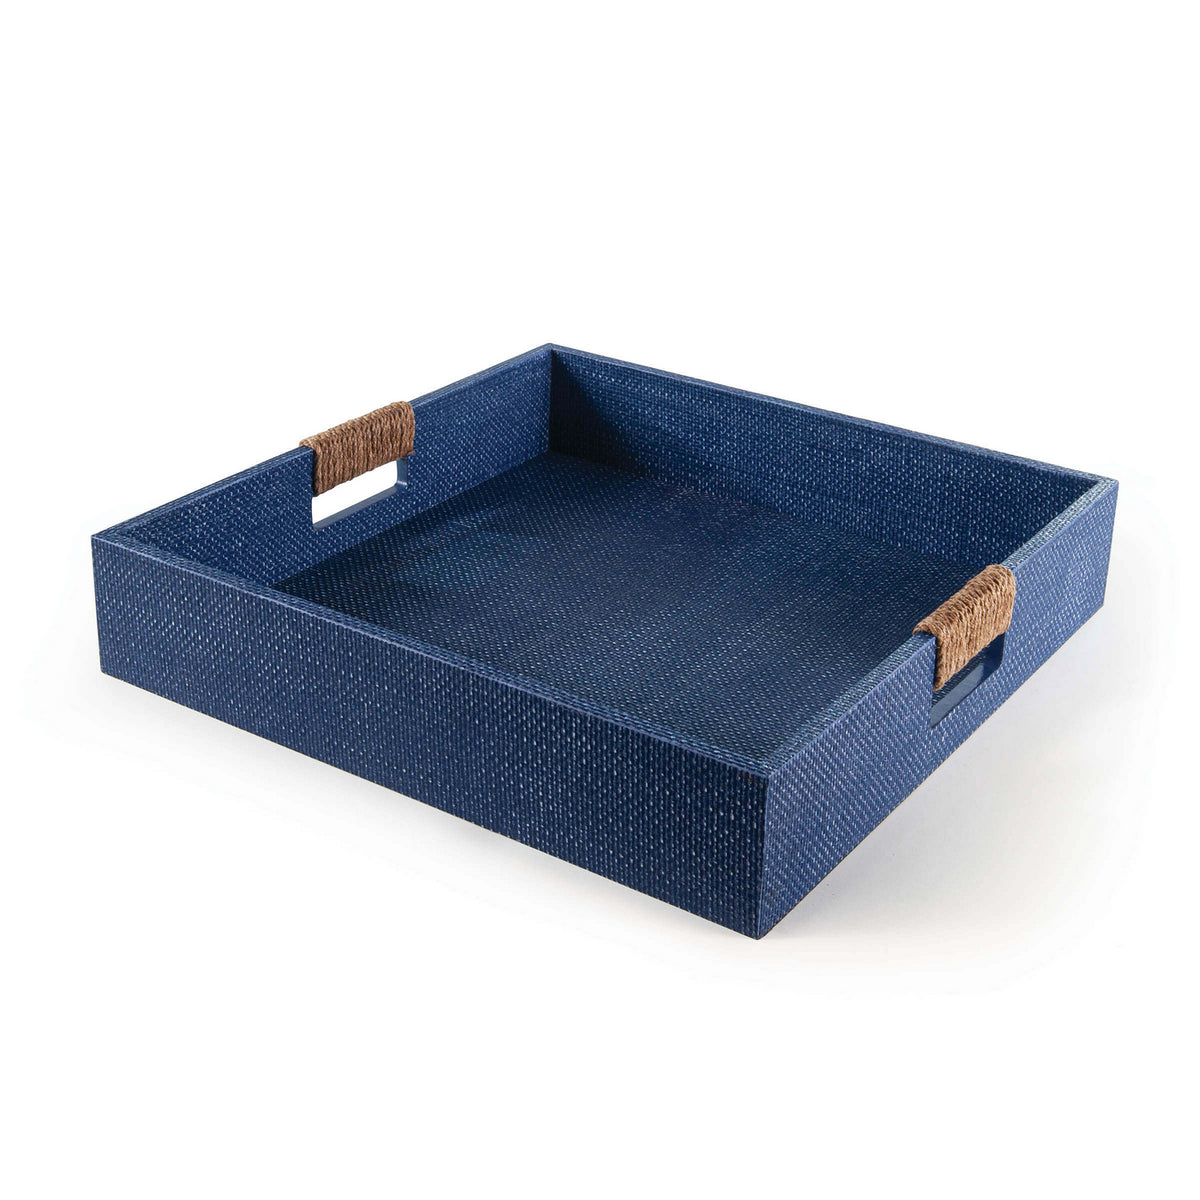 Regina Andrew Serving Tray from the Logia collection in Indigo finish